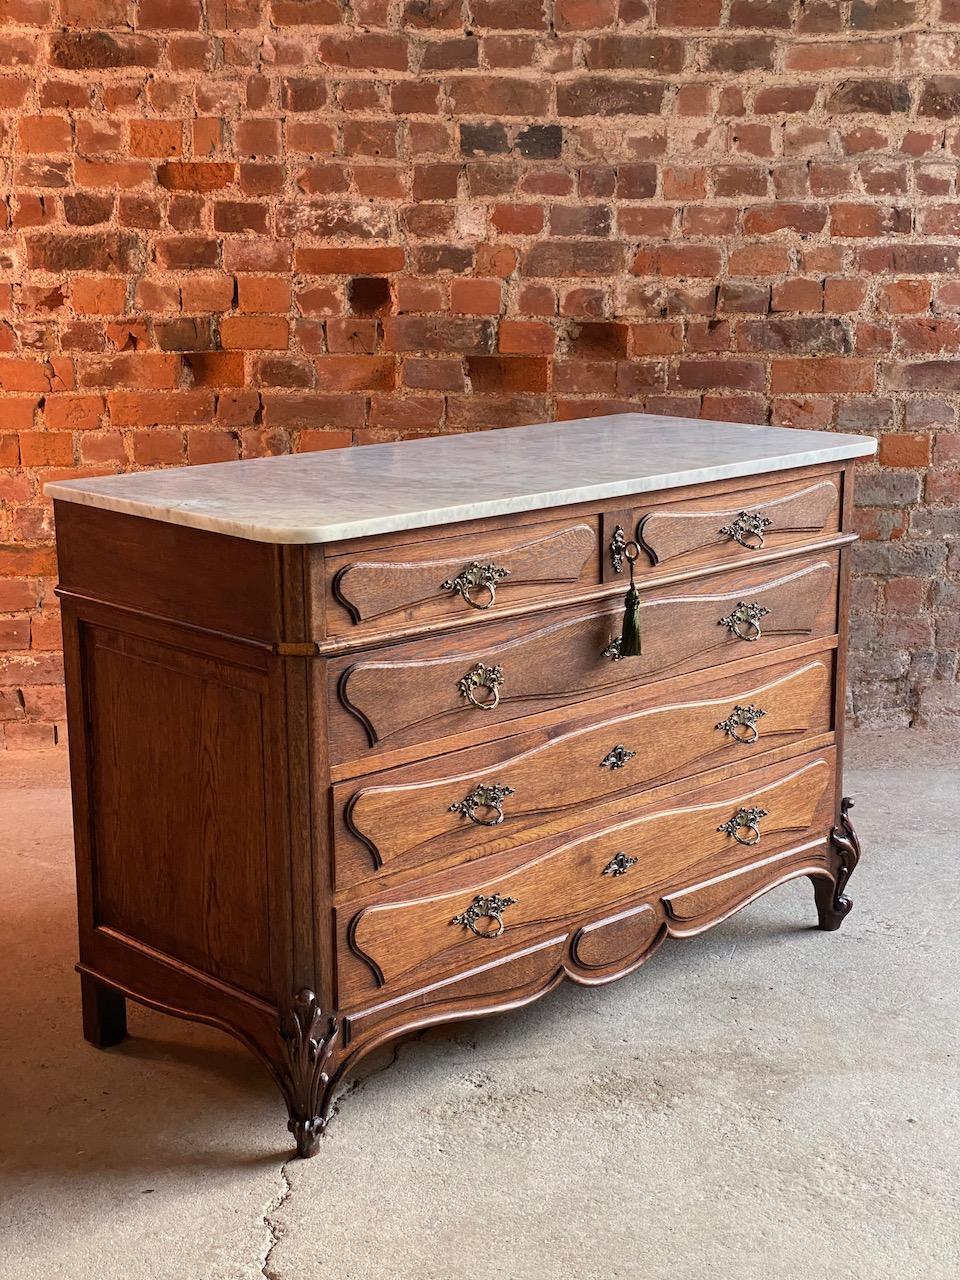 Antique French marble chest of drawers commode France circa 1890 number 12

Beautiful French antique marble topped oak commode chest of drawers, circa 1890, this chest dates to the late 19th century, the elegant white with grey veins marble top